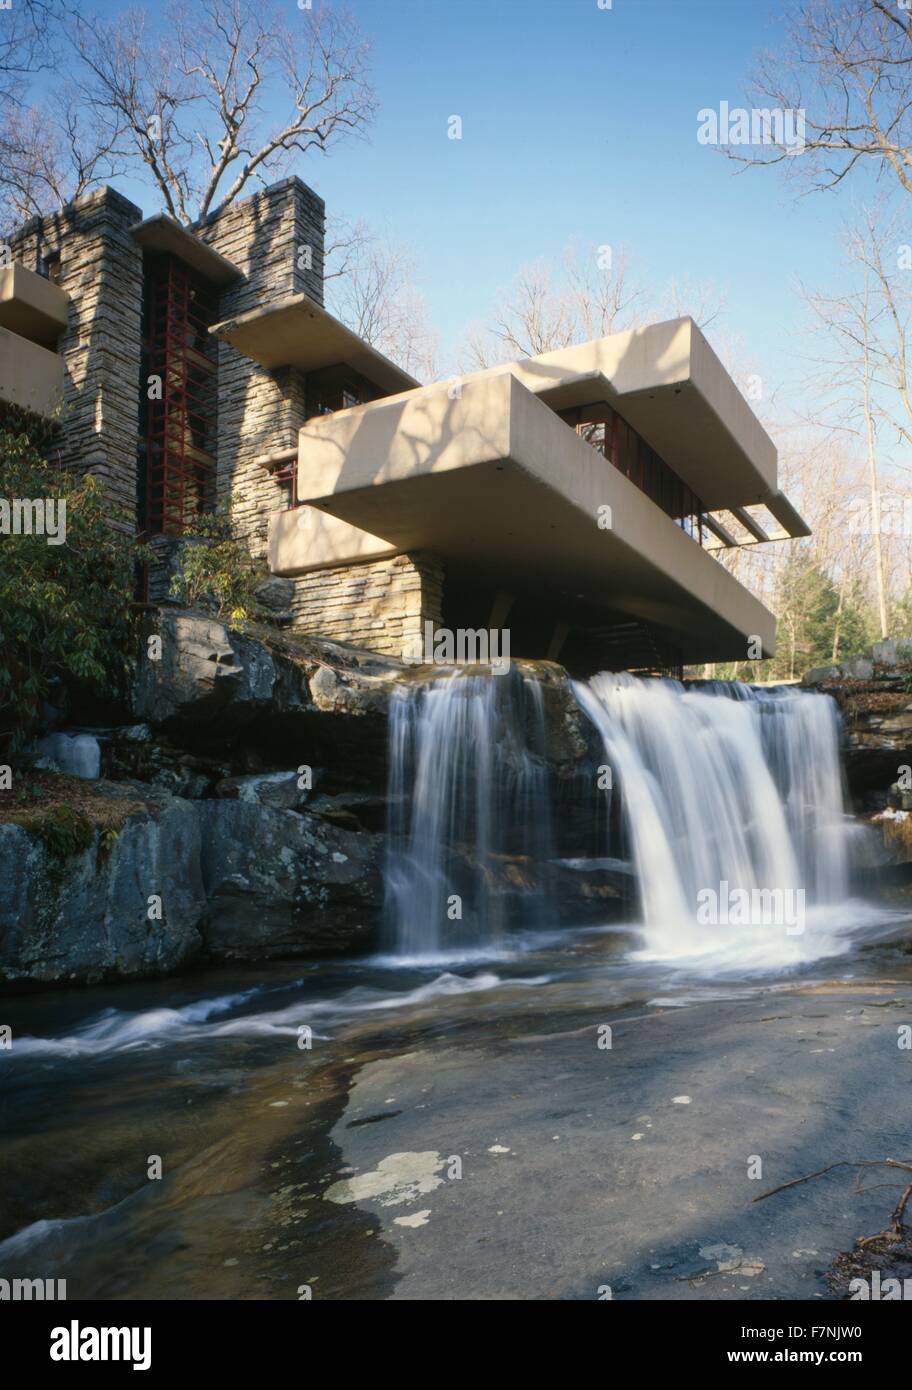 Fallingwater or Kaufmann Residence is a house designed by architect Frank Lloyd Wright in 1935 in rural southwestern Pennsylvania Stock Photo